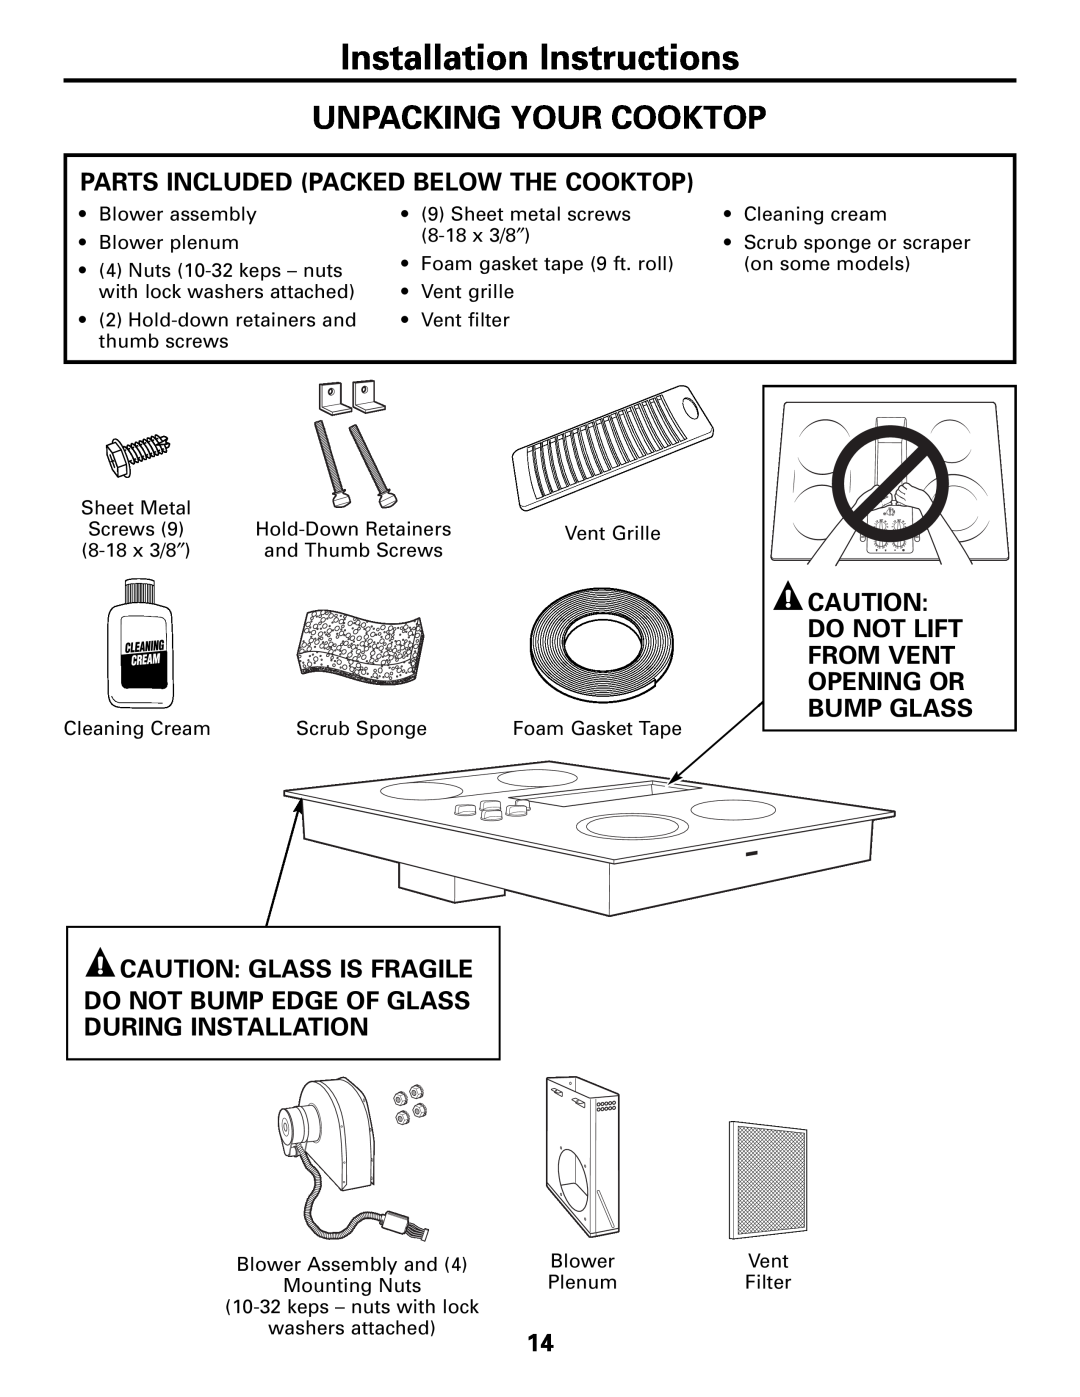 GE JP989SKSS Installation Instructions, Unpacking Your Cooktop, Parts Included Packed Below The Cooktop, Do Not Lift 